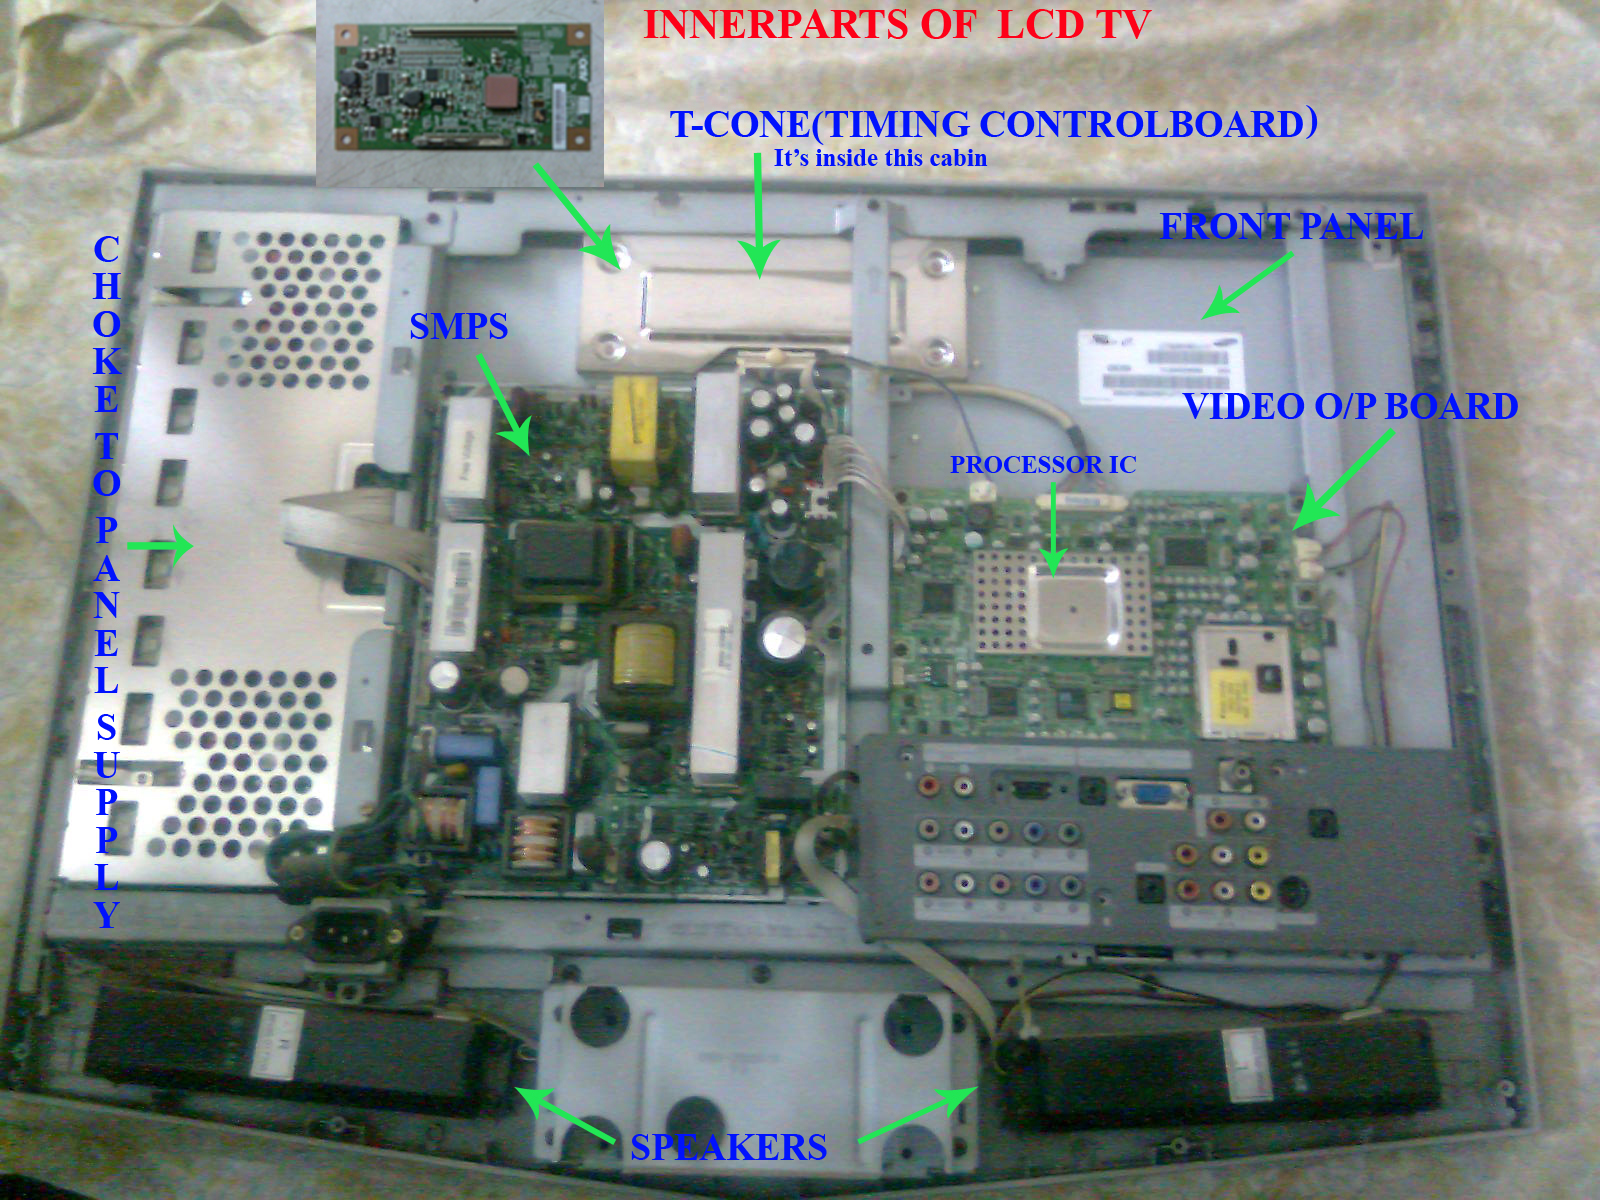 Thinking about new technology: Inner Parts of LCD tv.....